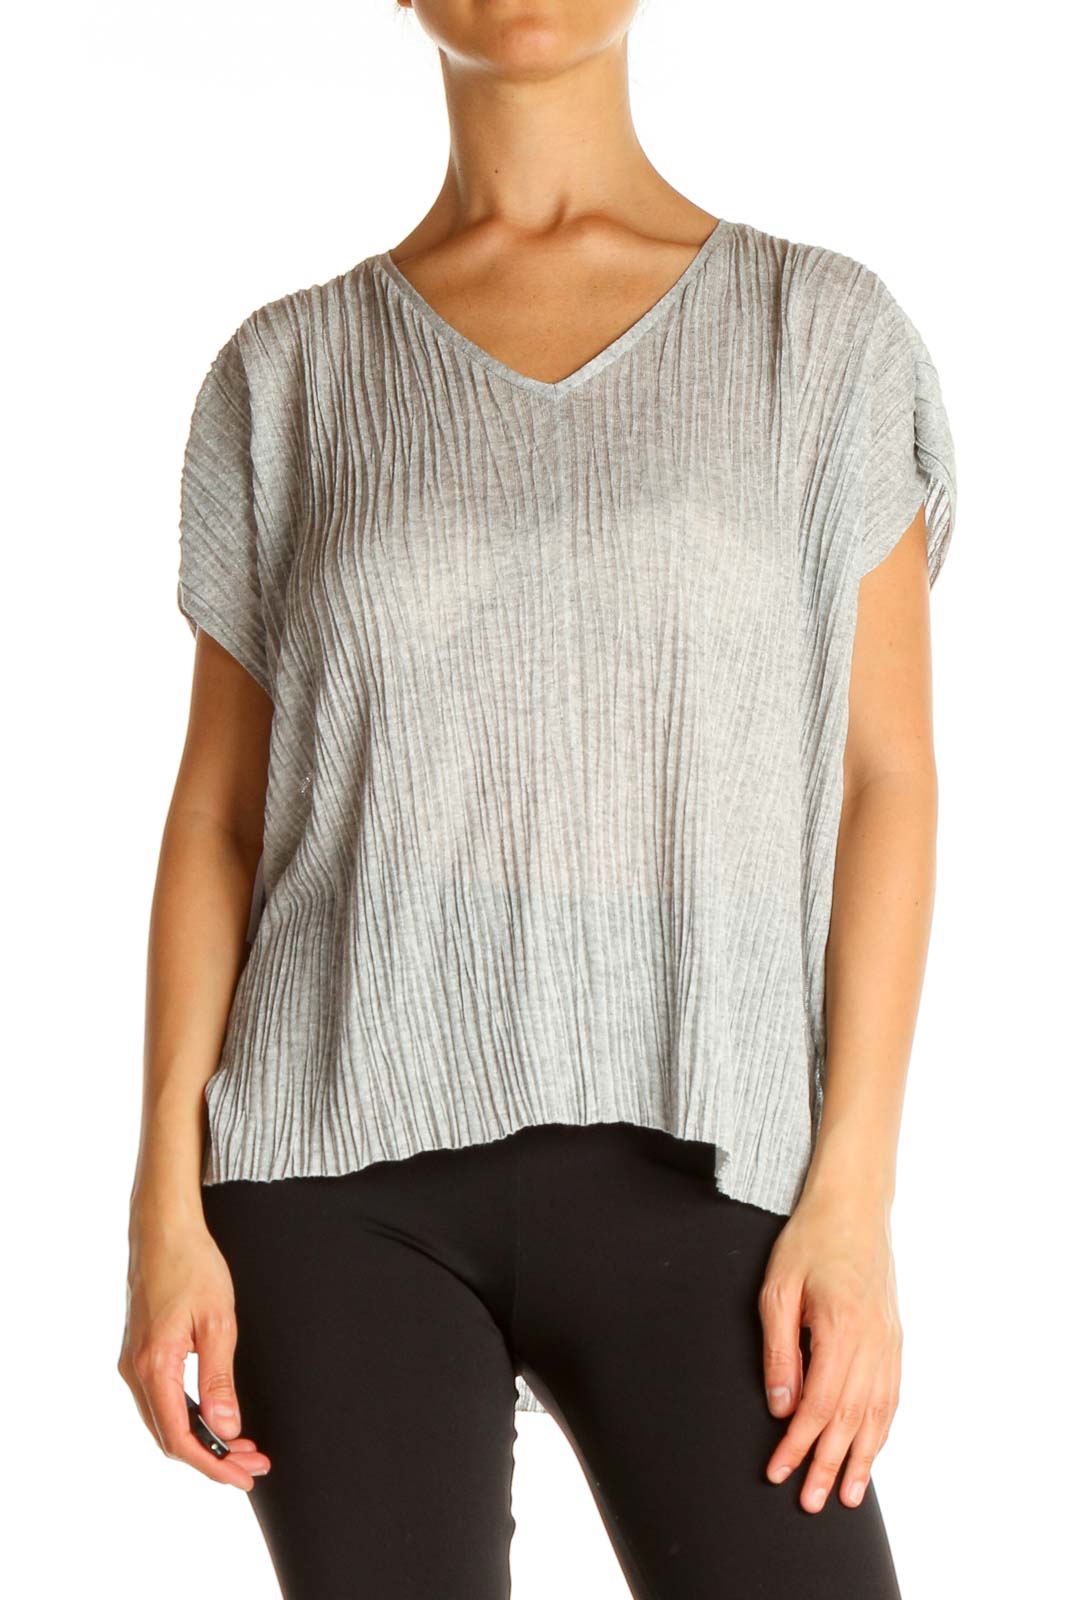 Gray Textured All Day Wear Top Front